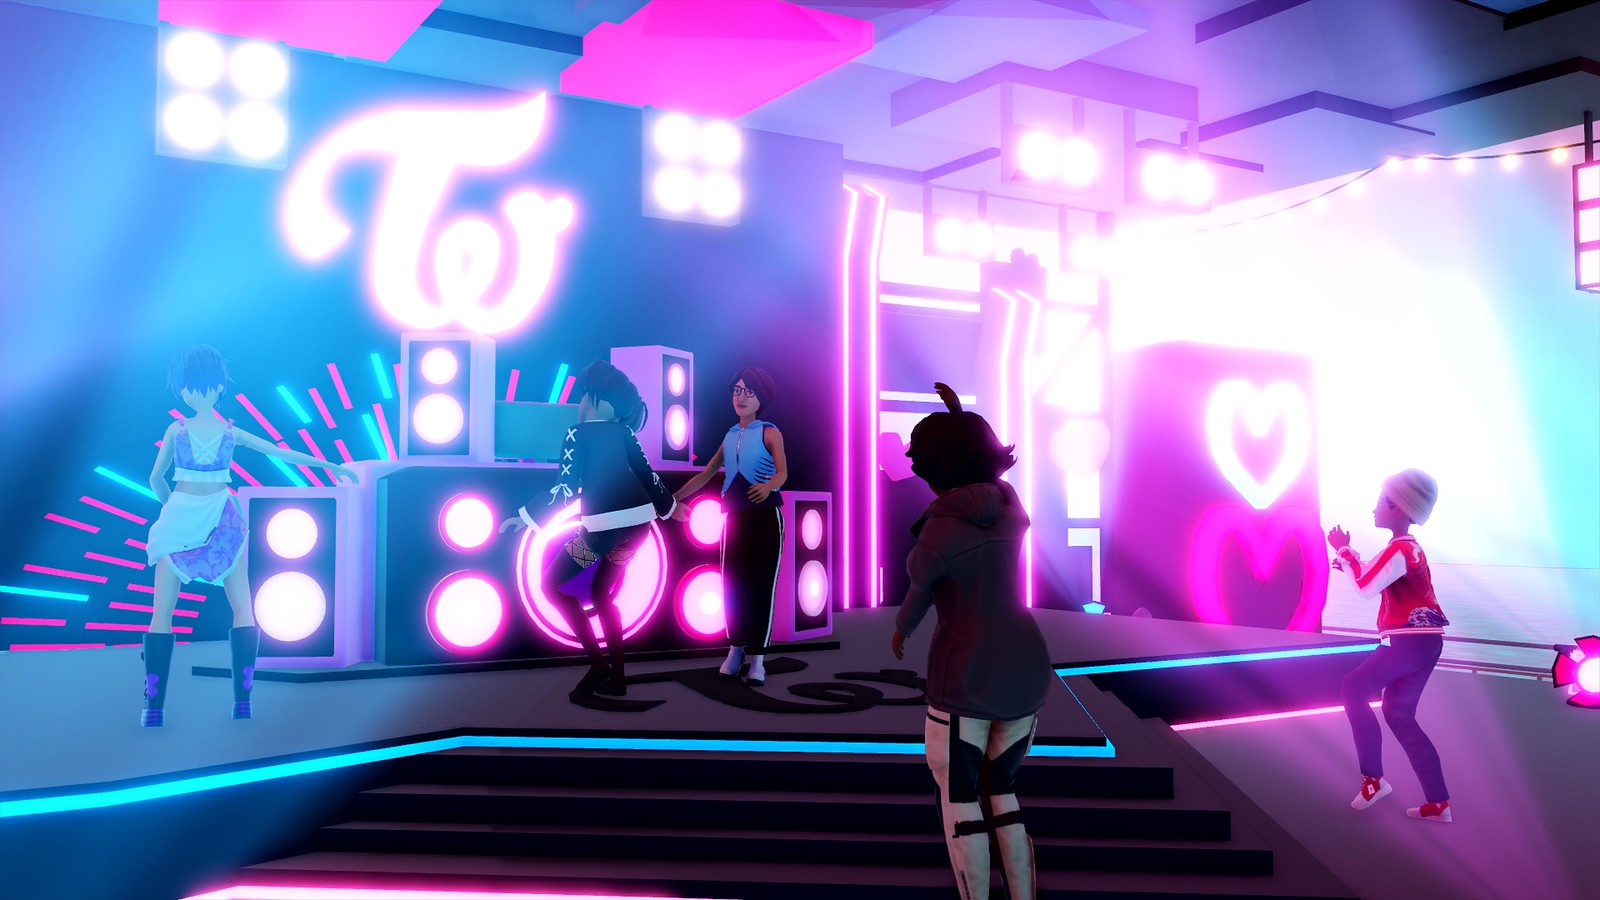 Several characters dance in groups or solo in a neon-infused nightclub.